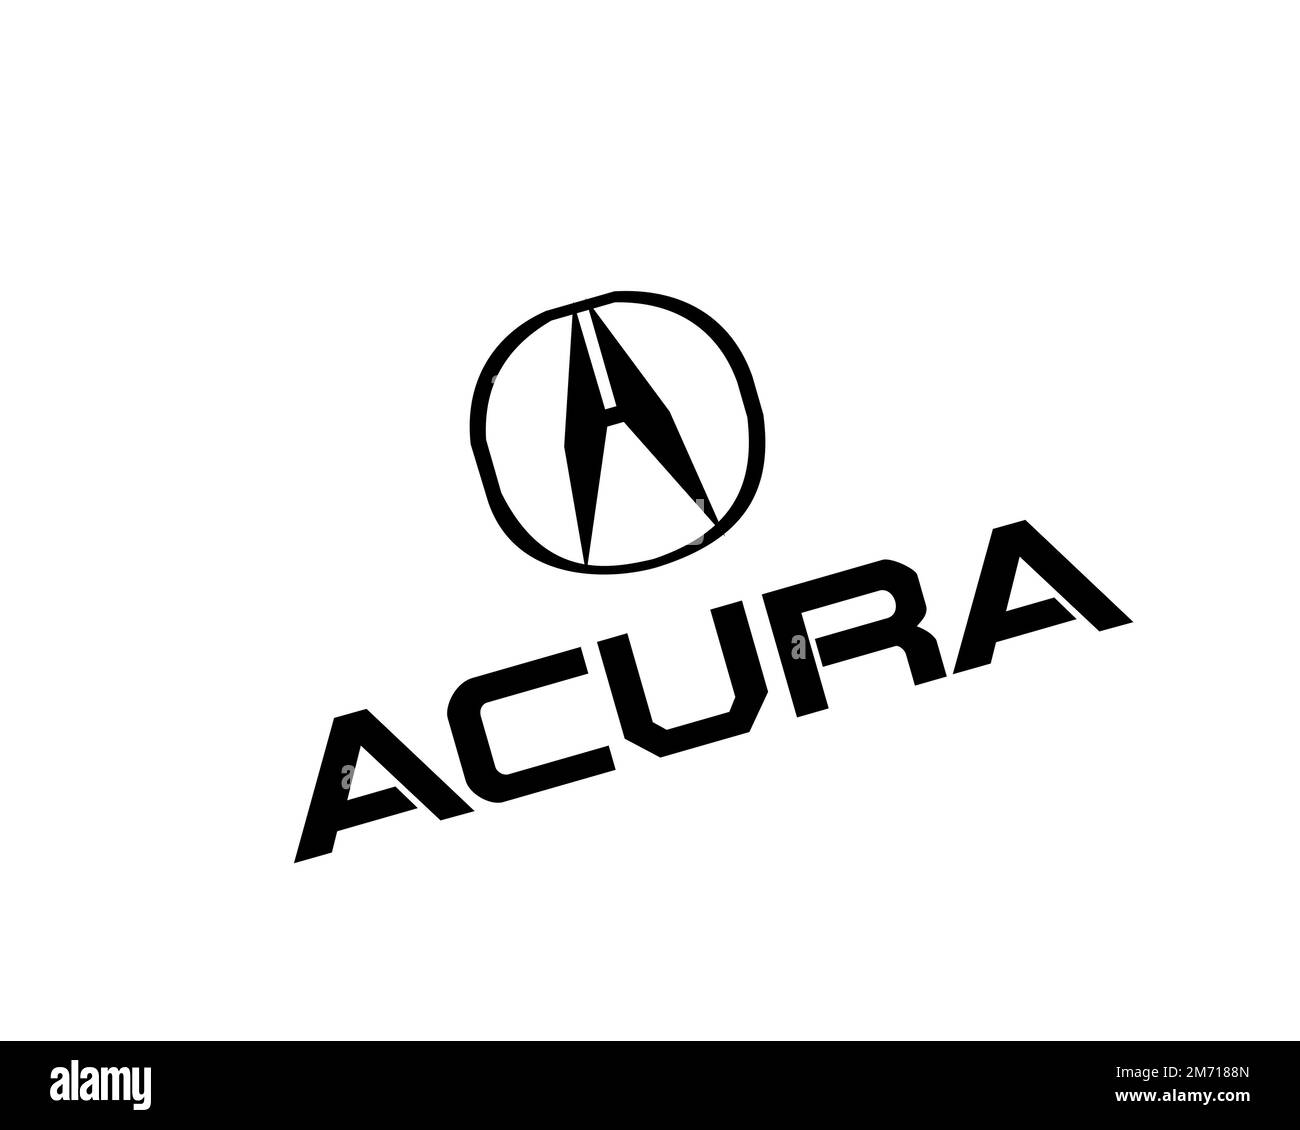 173 Acura Logo Images, Stock Photos, 3D objects, & Vectors